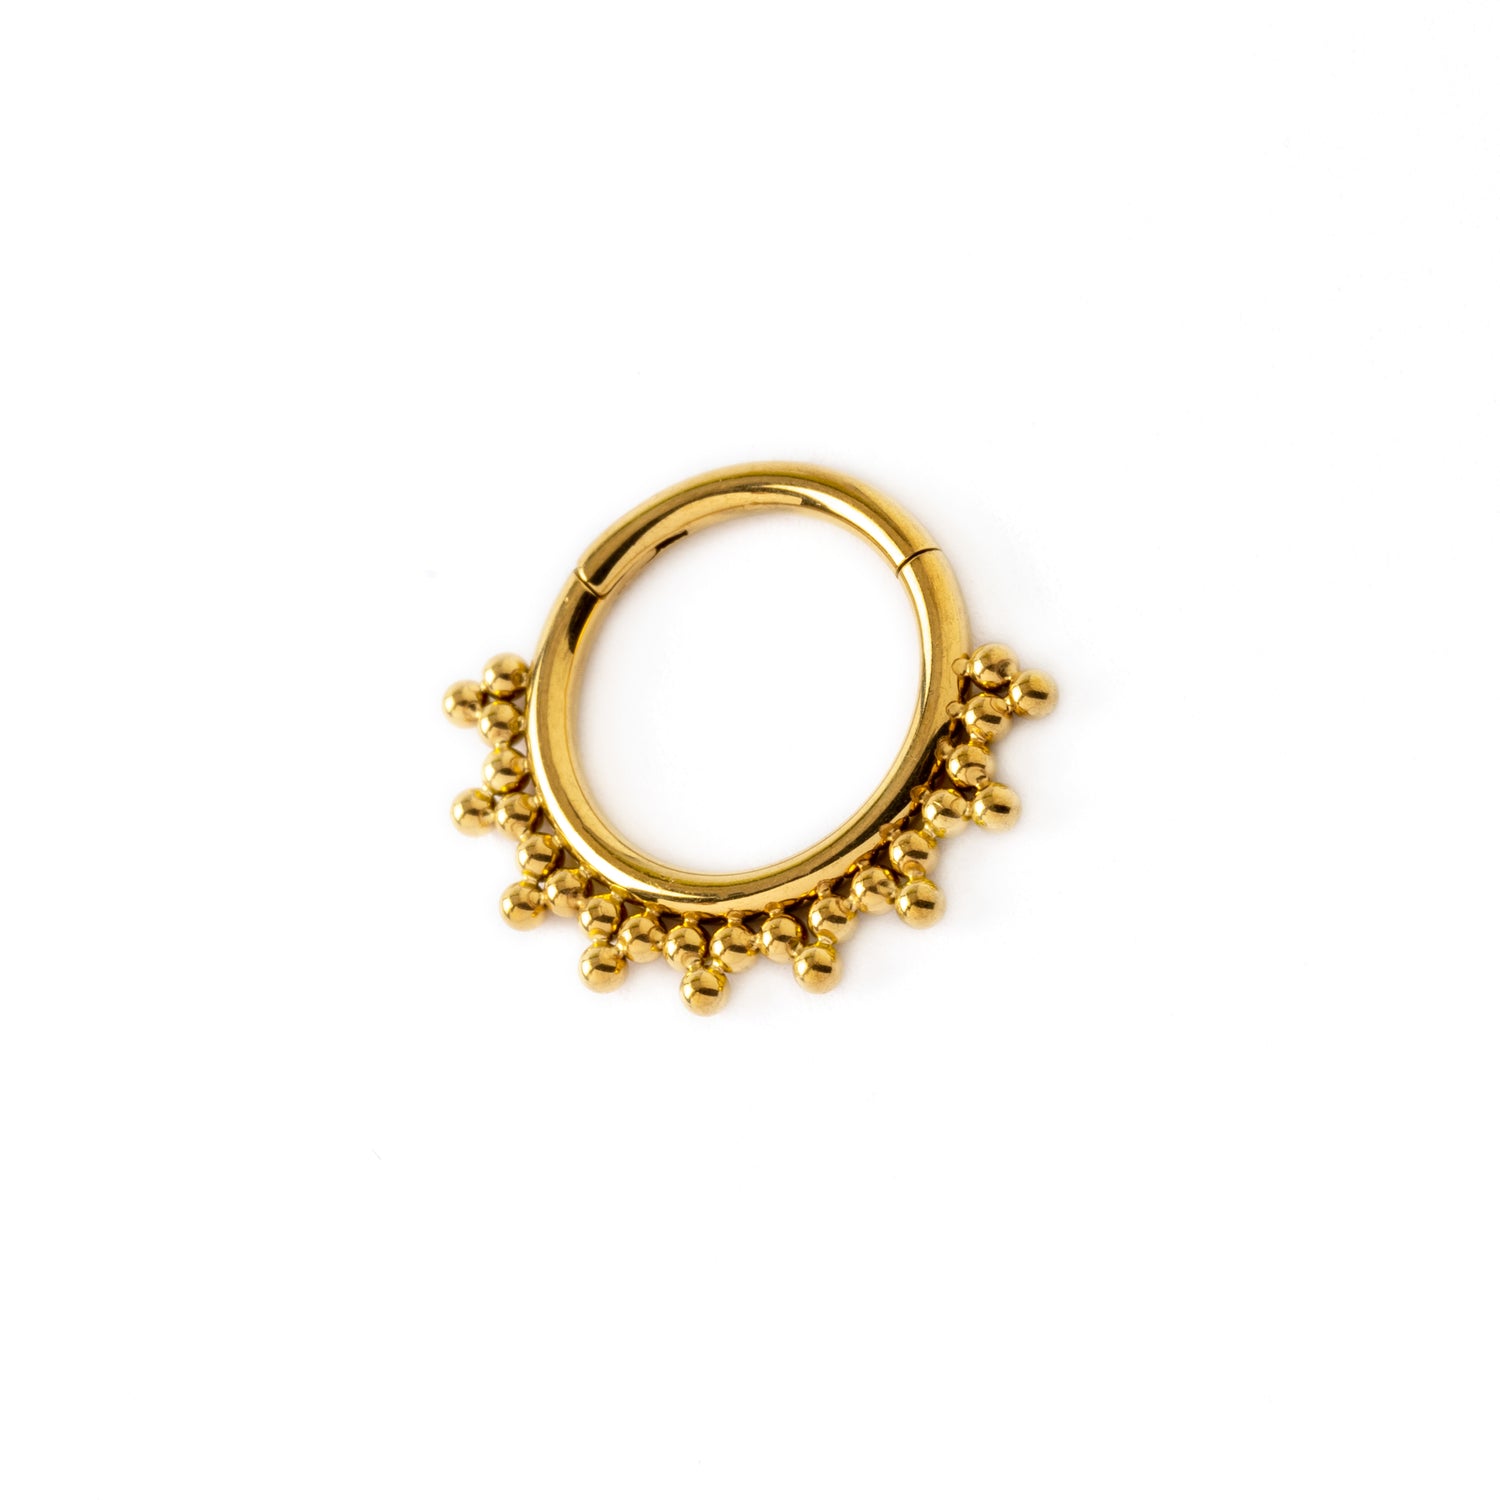 Sarika gold surgical steel septum clicker left side view